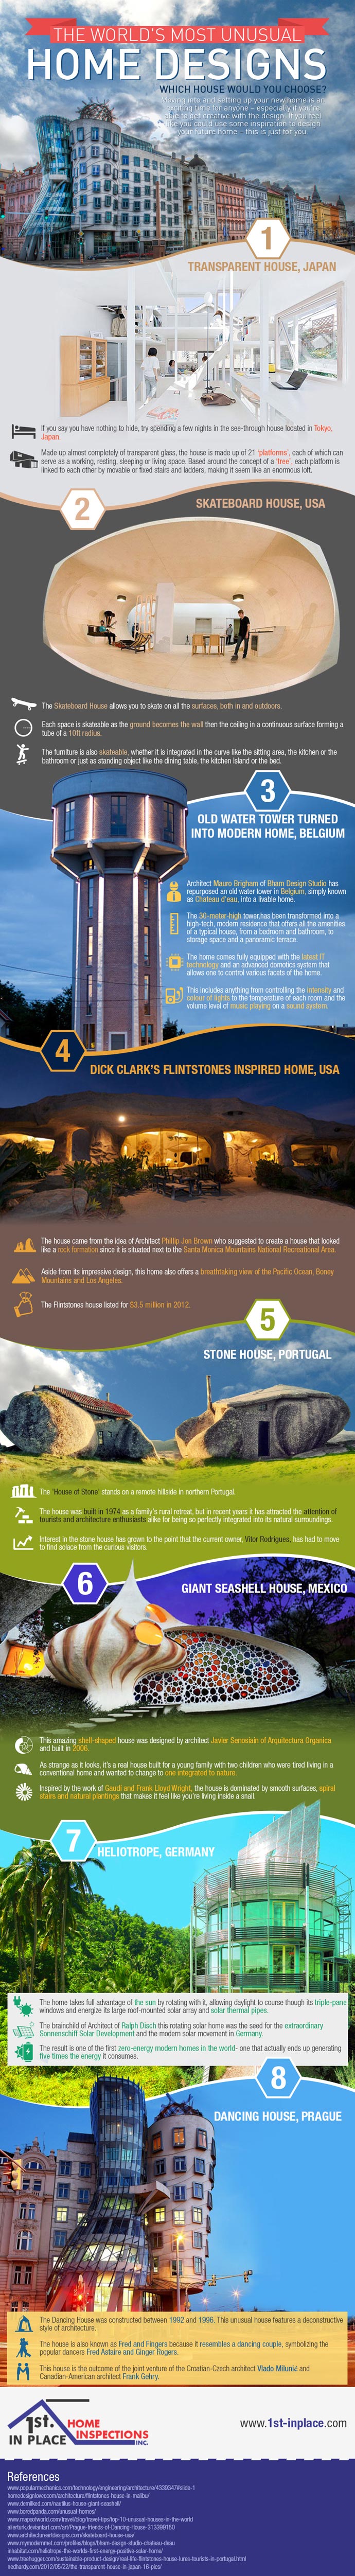 [infographic]  - the world's most unusual home designs